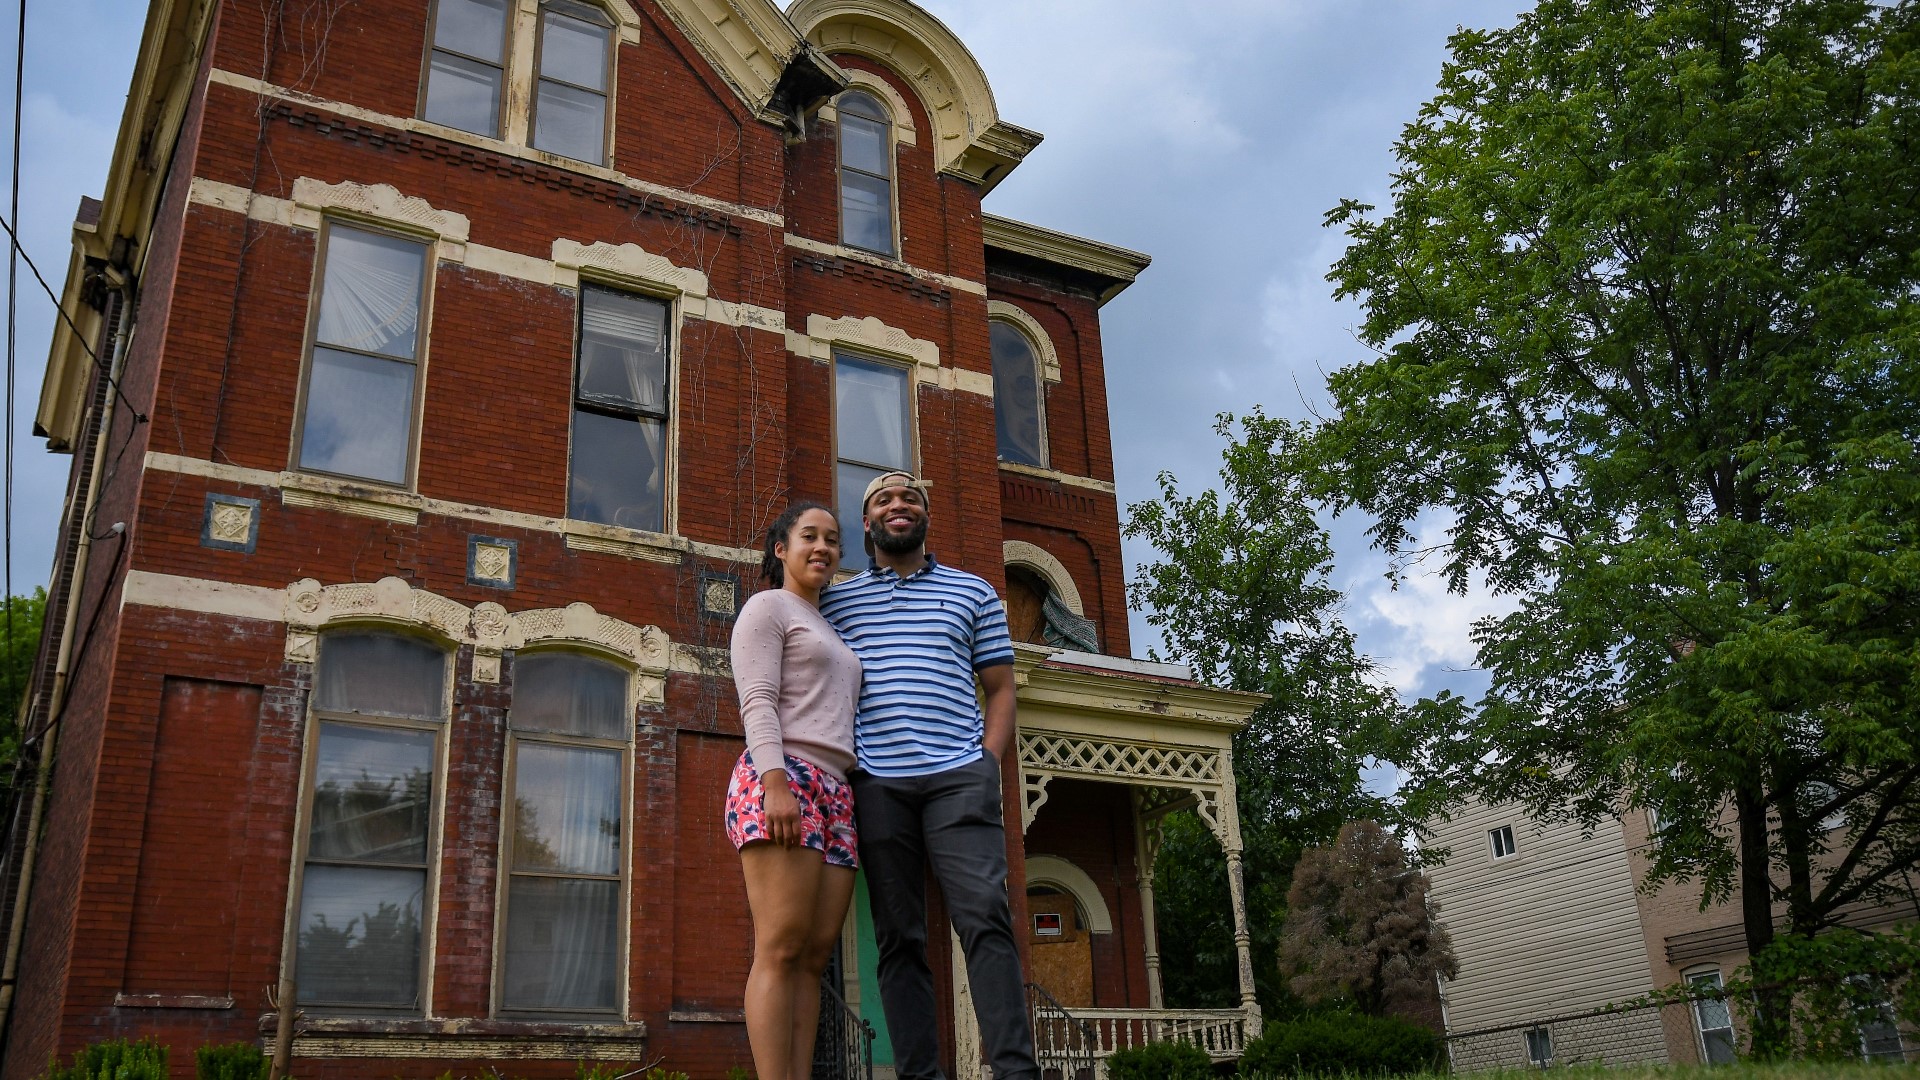 A piece of Louisville residential history is returning to its former glory, thanks to a young couple living in the Russell neighborhood of west Louisville.